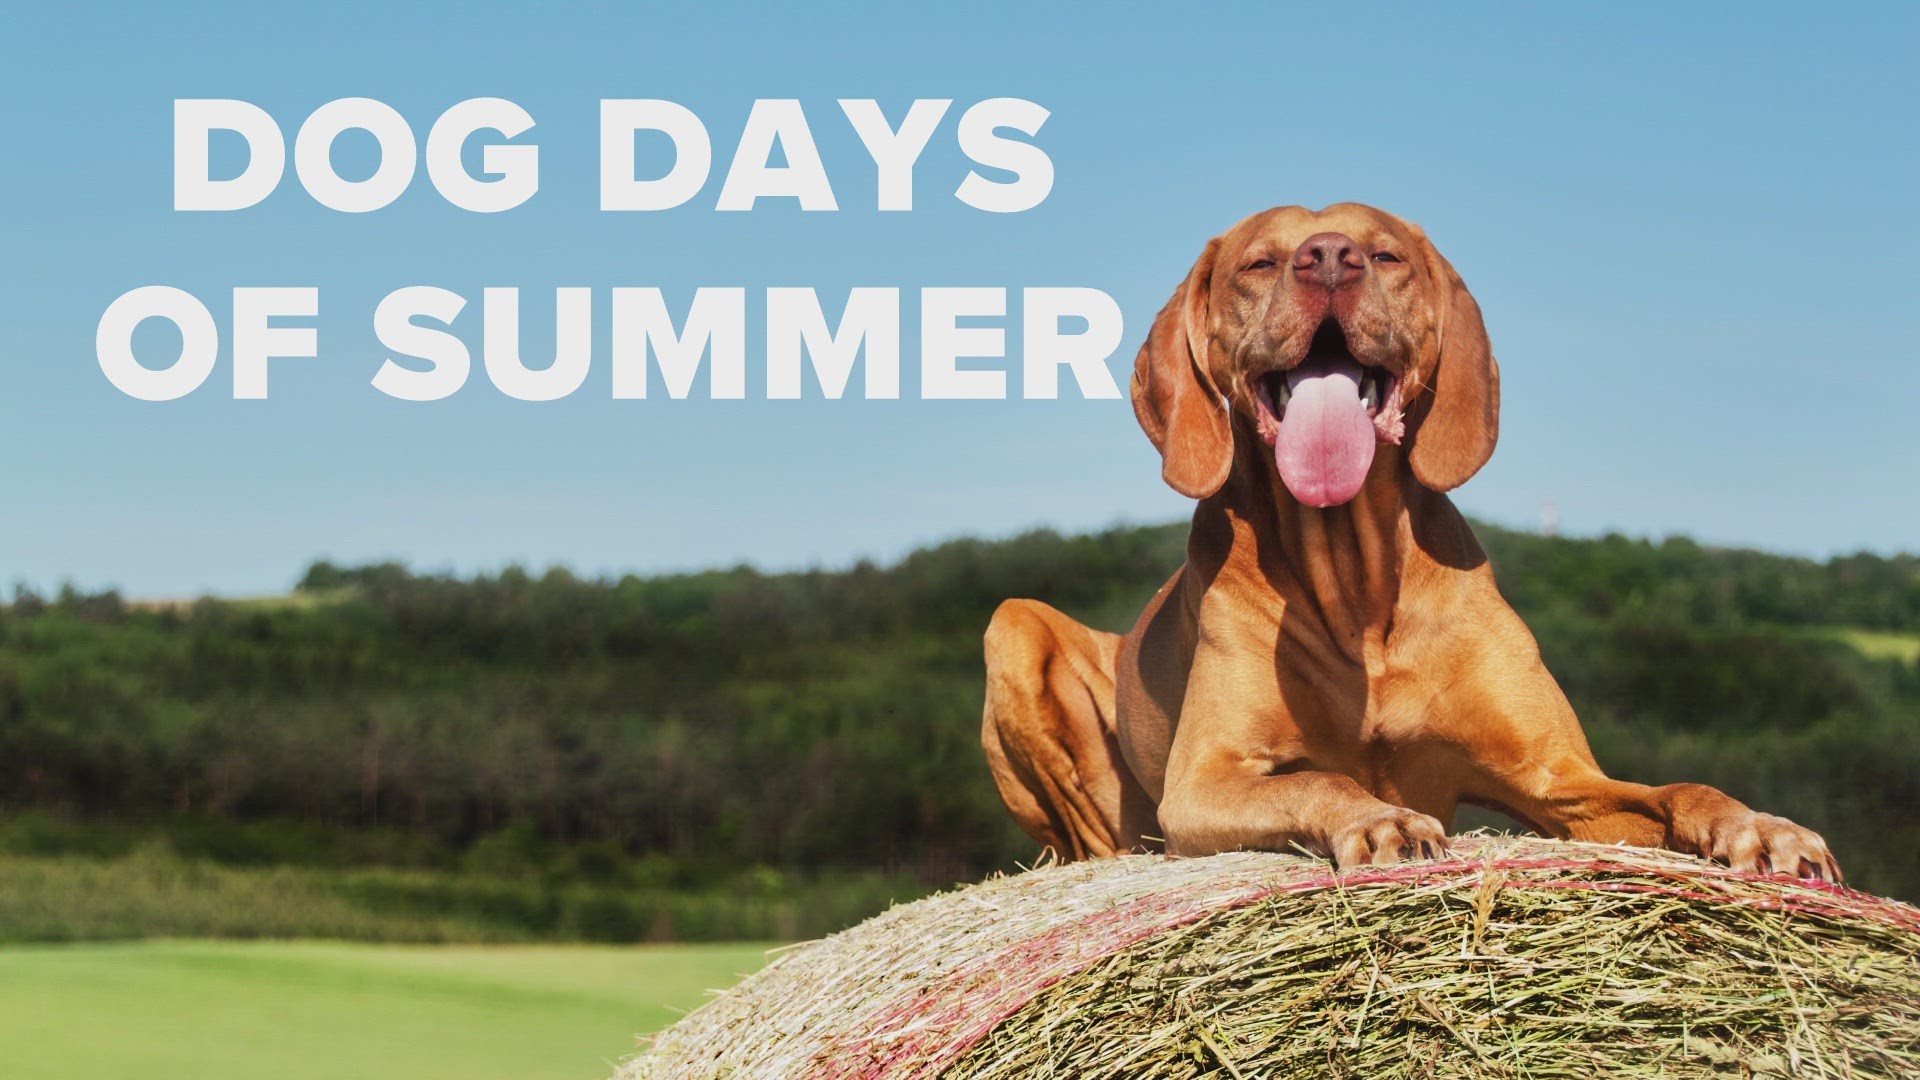 The dog days of summer have nothing to do with panting dogs but instead originates from inaccurate thinking by the Ancient Greeks and Romans.